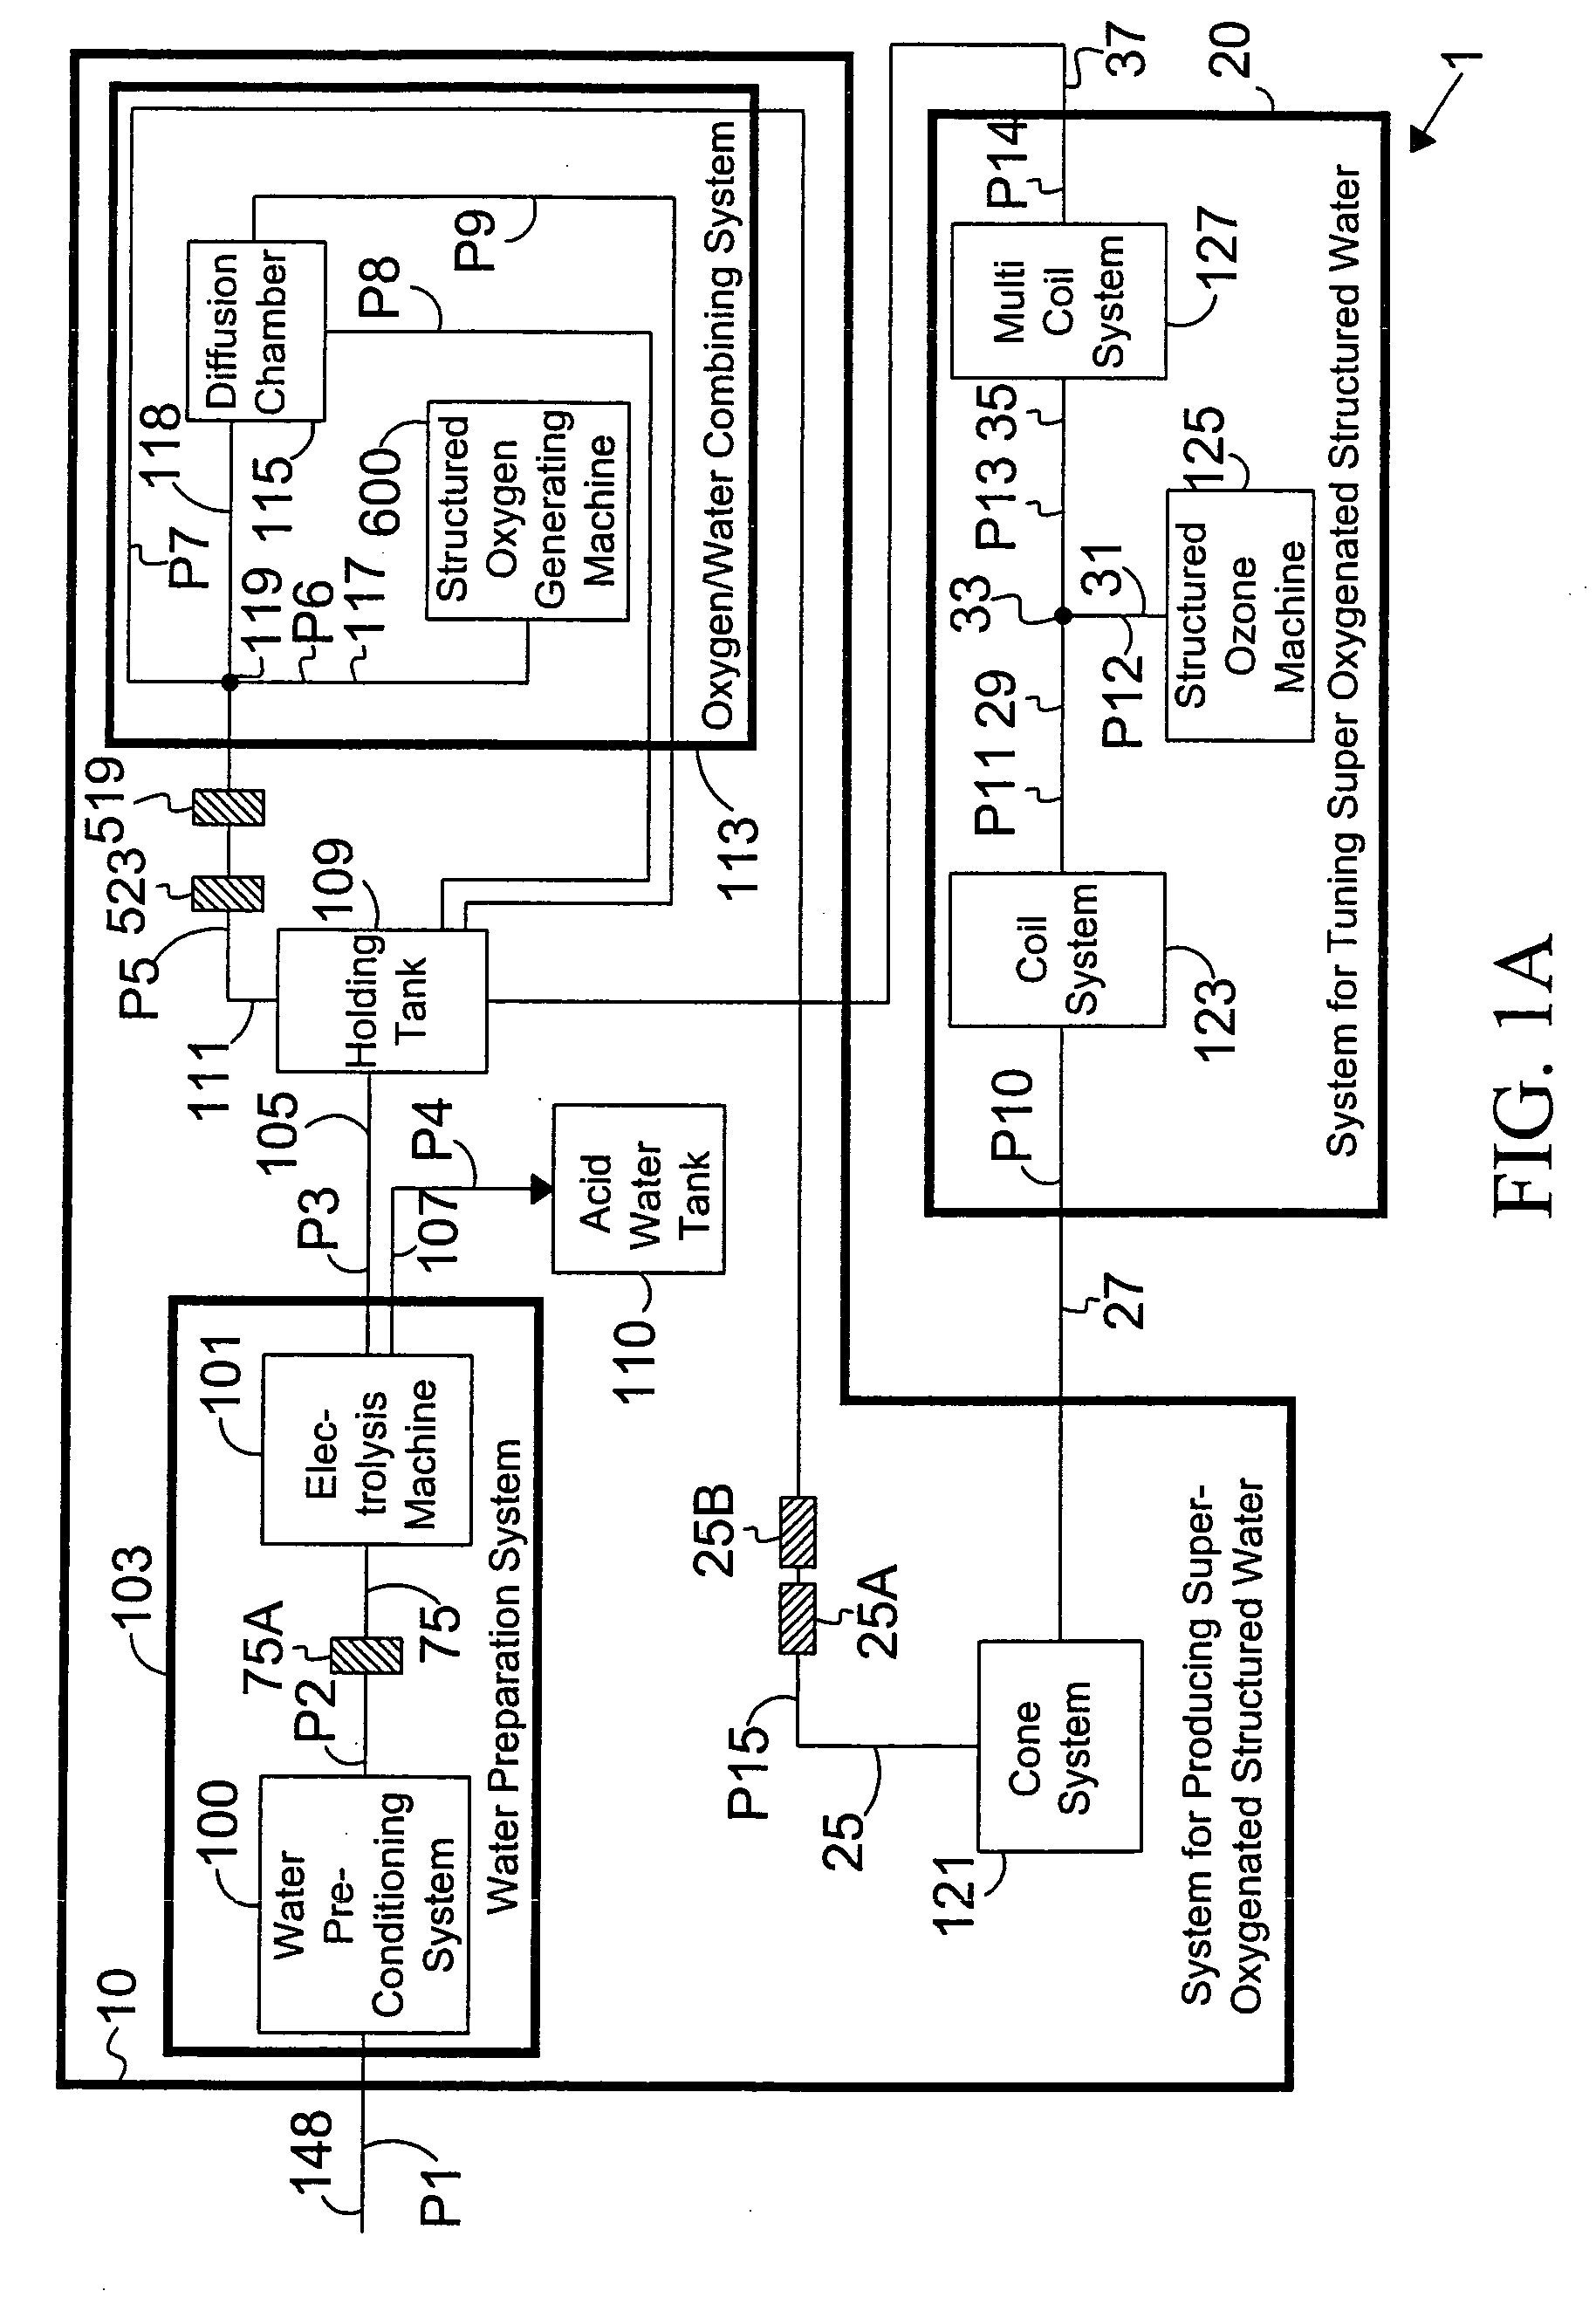 Method for making and conditioning super-oxygenated and structured water